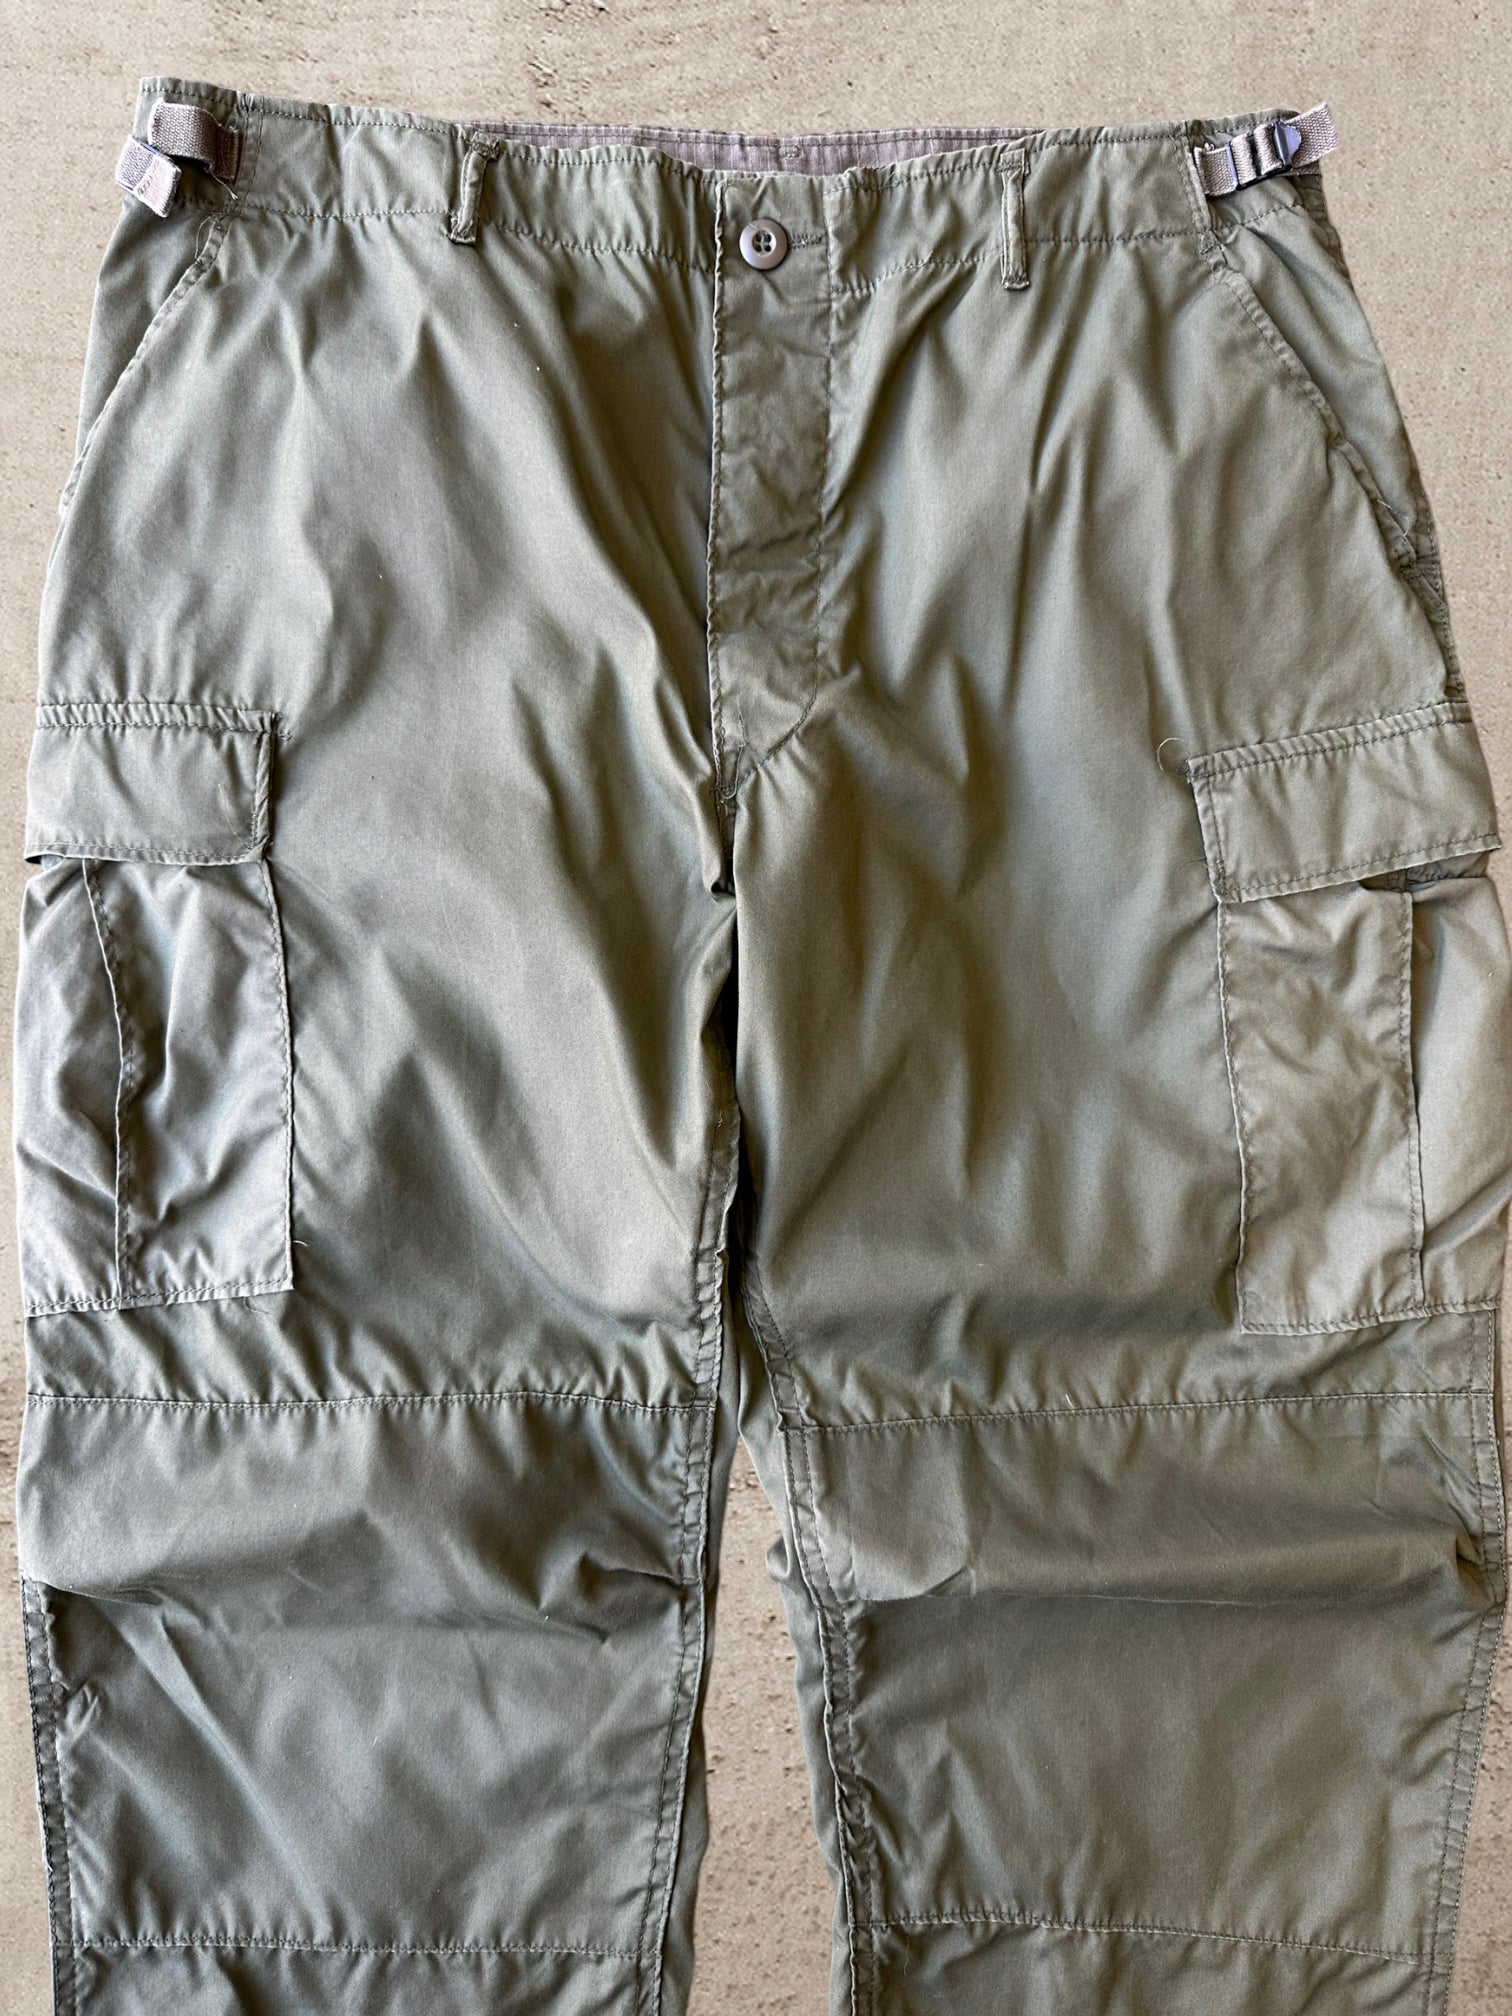 Vintage Military Green Cargo Pants - 35-39x31